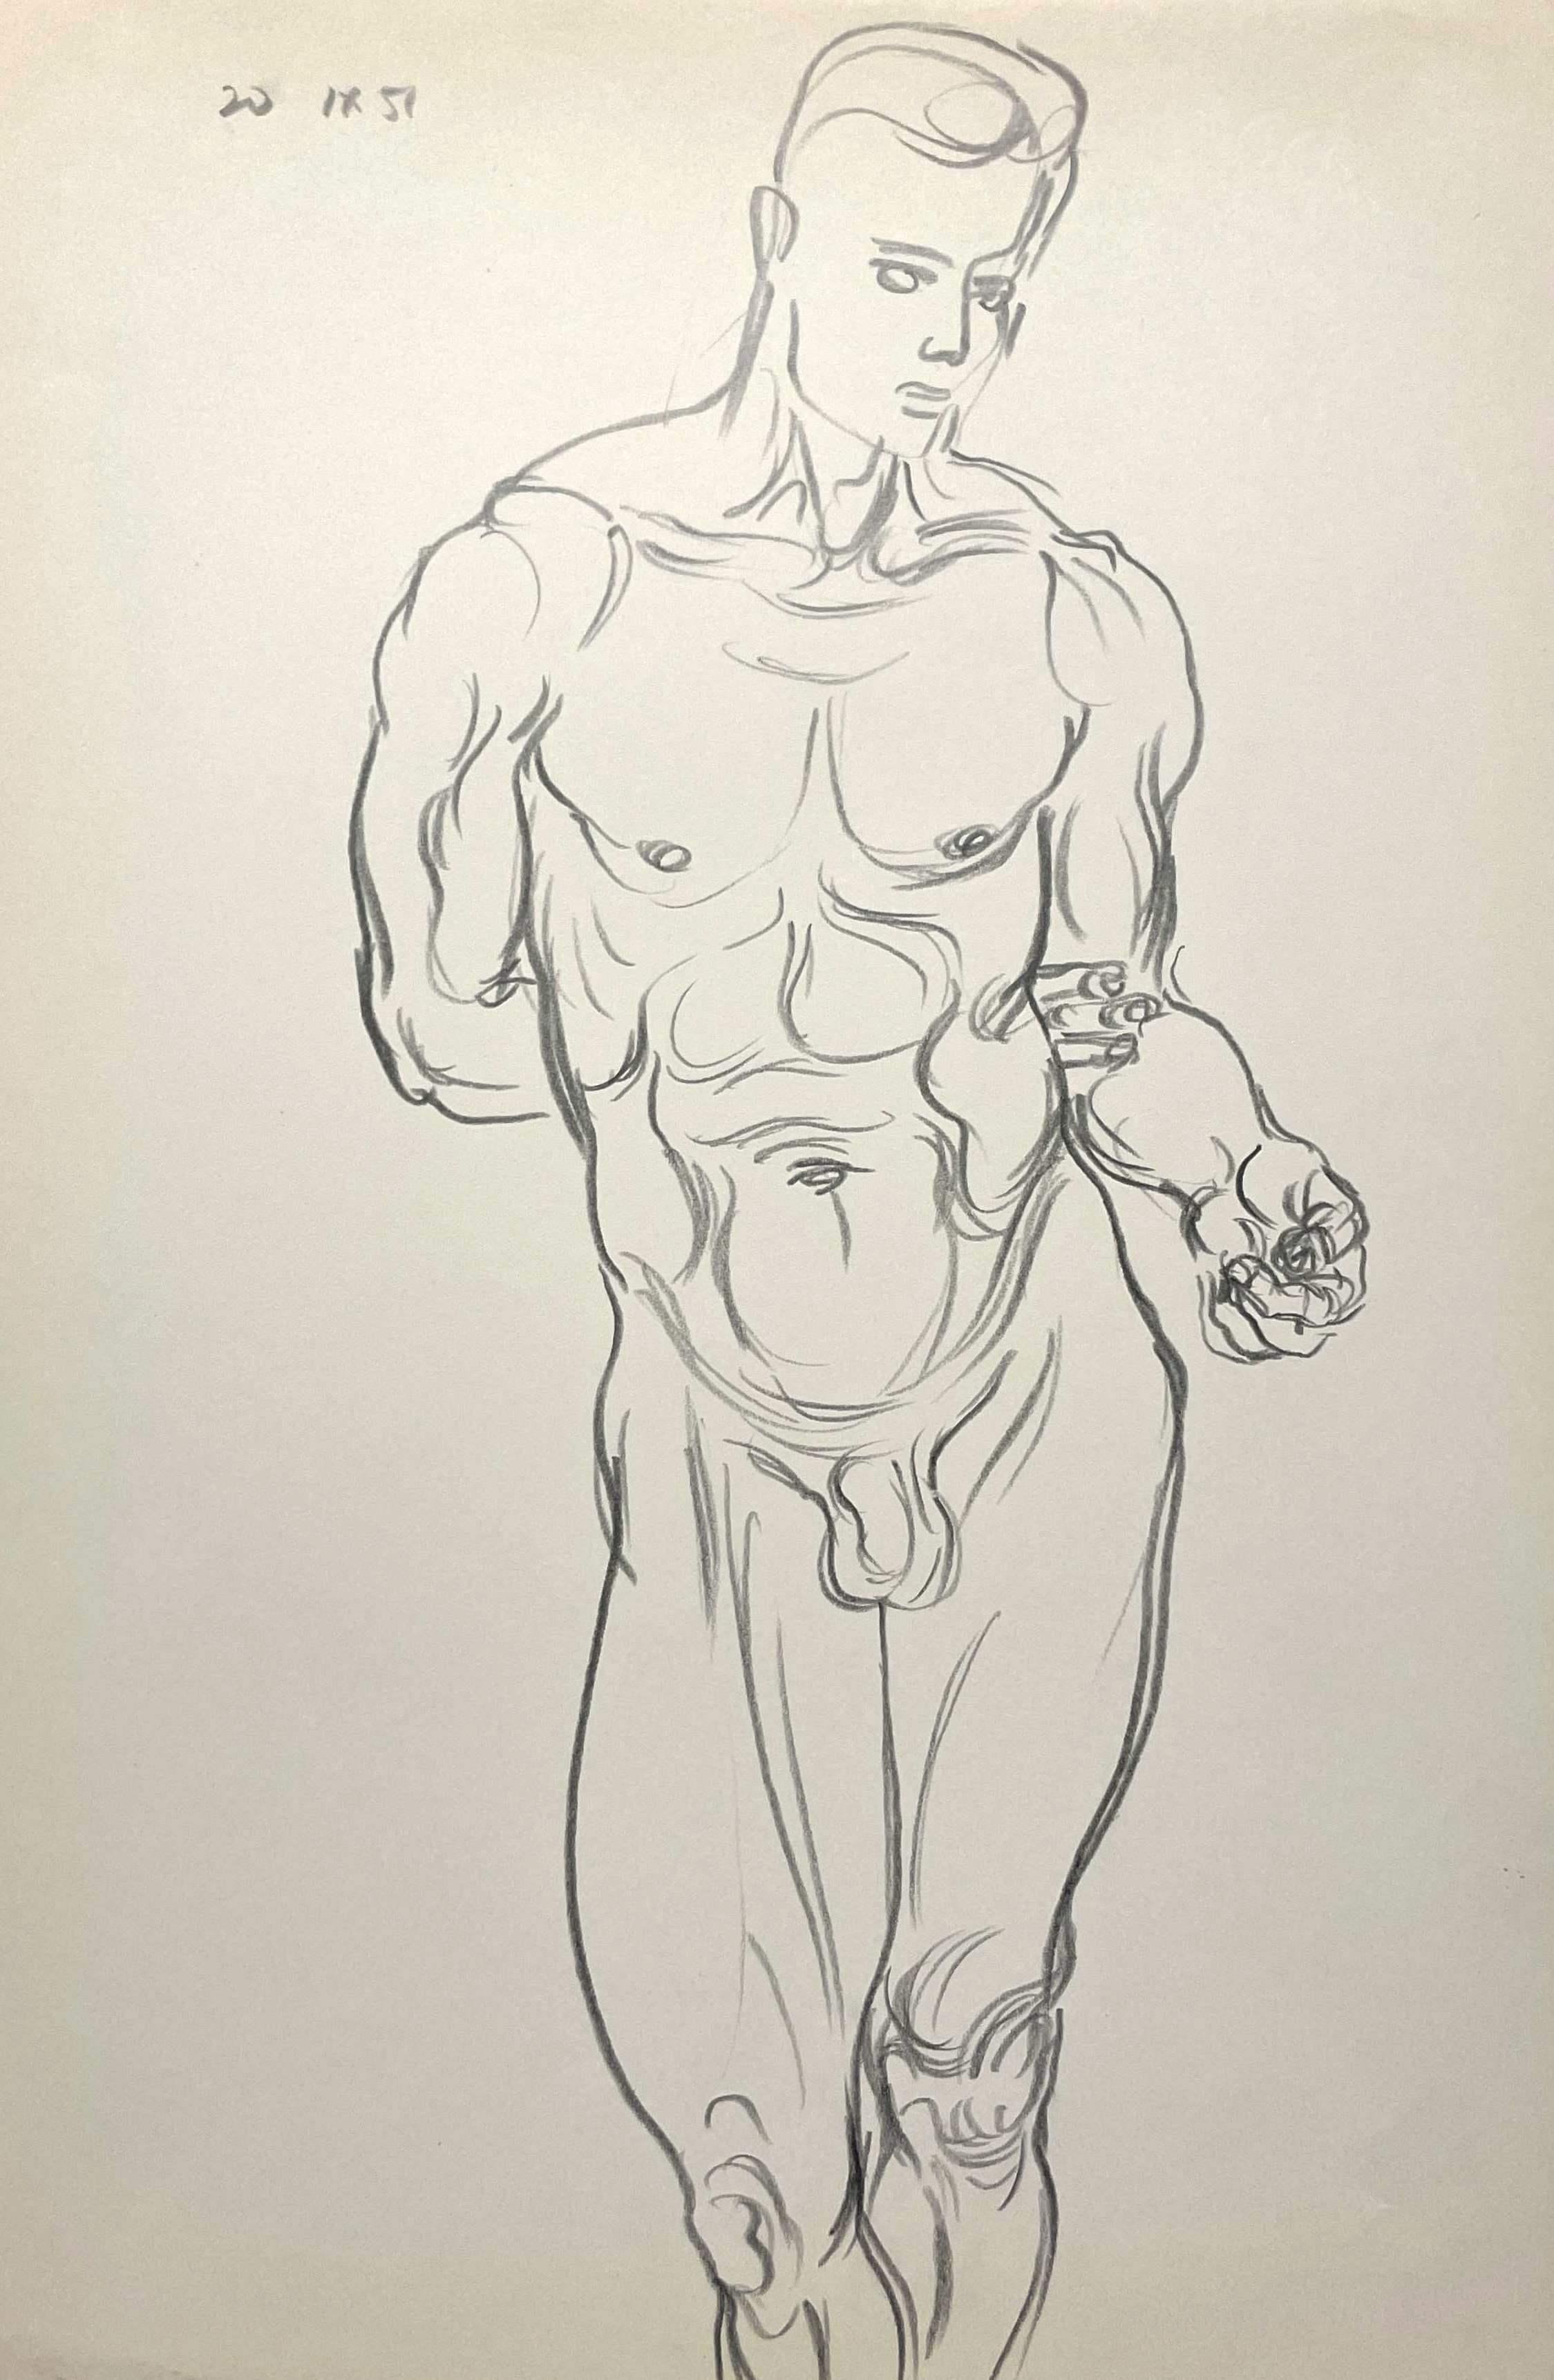 A black and white figure study of a standing nude male, from 1951, by artist Harold Haydon.  Matted to 24" x 20".  Provenance:  Estate of the Artist.  Estate stamped on reverse.

Harold Emerson Haydon was born in Fort William, Ontario, Canada in